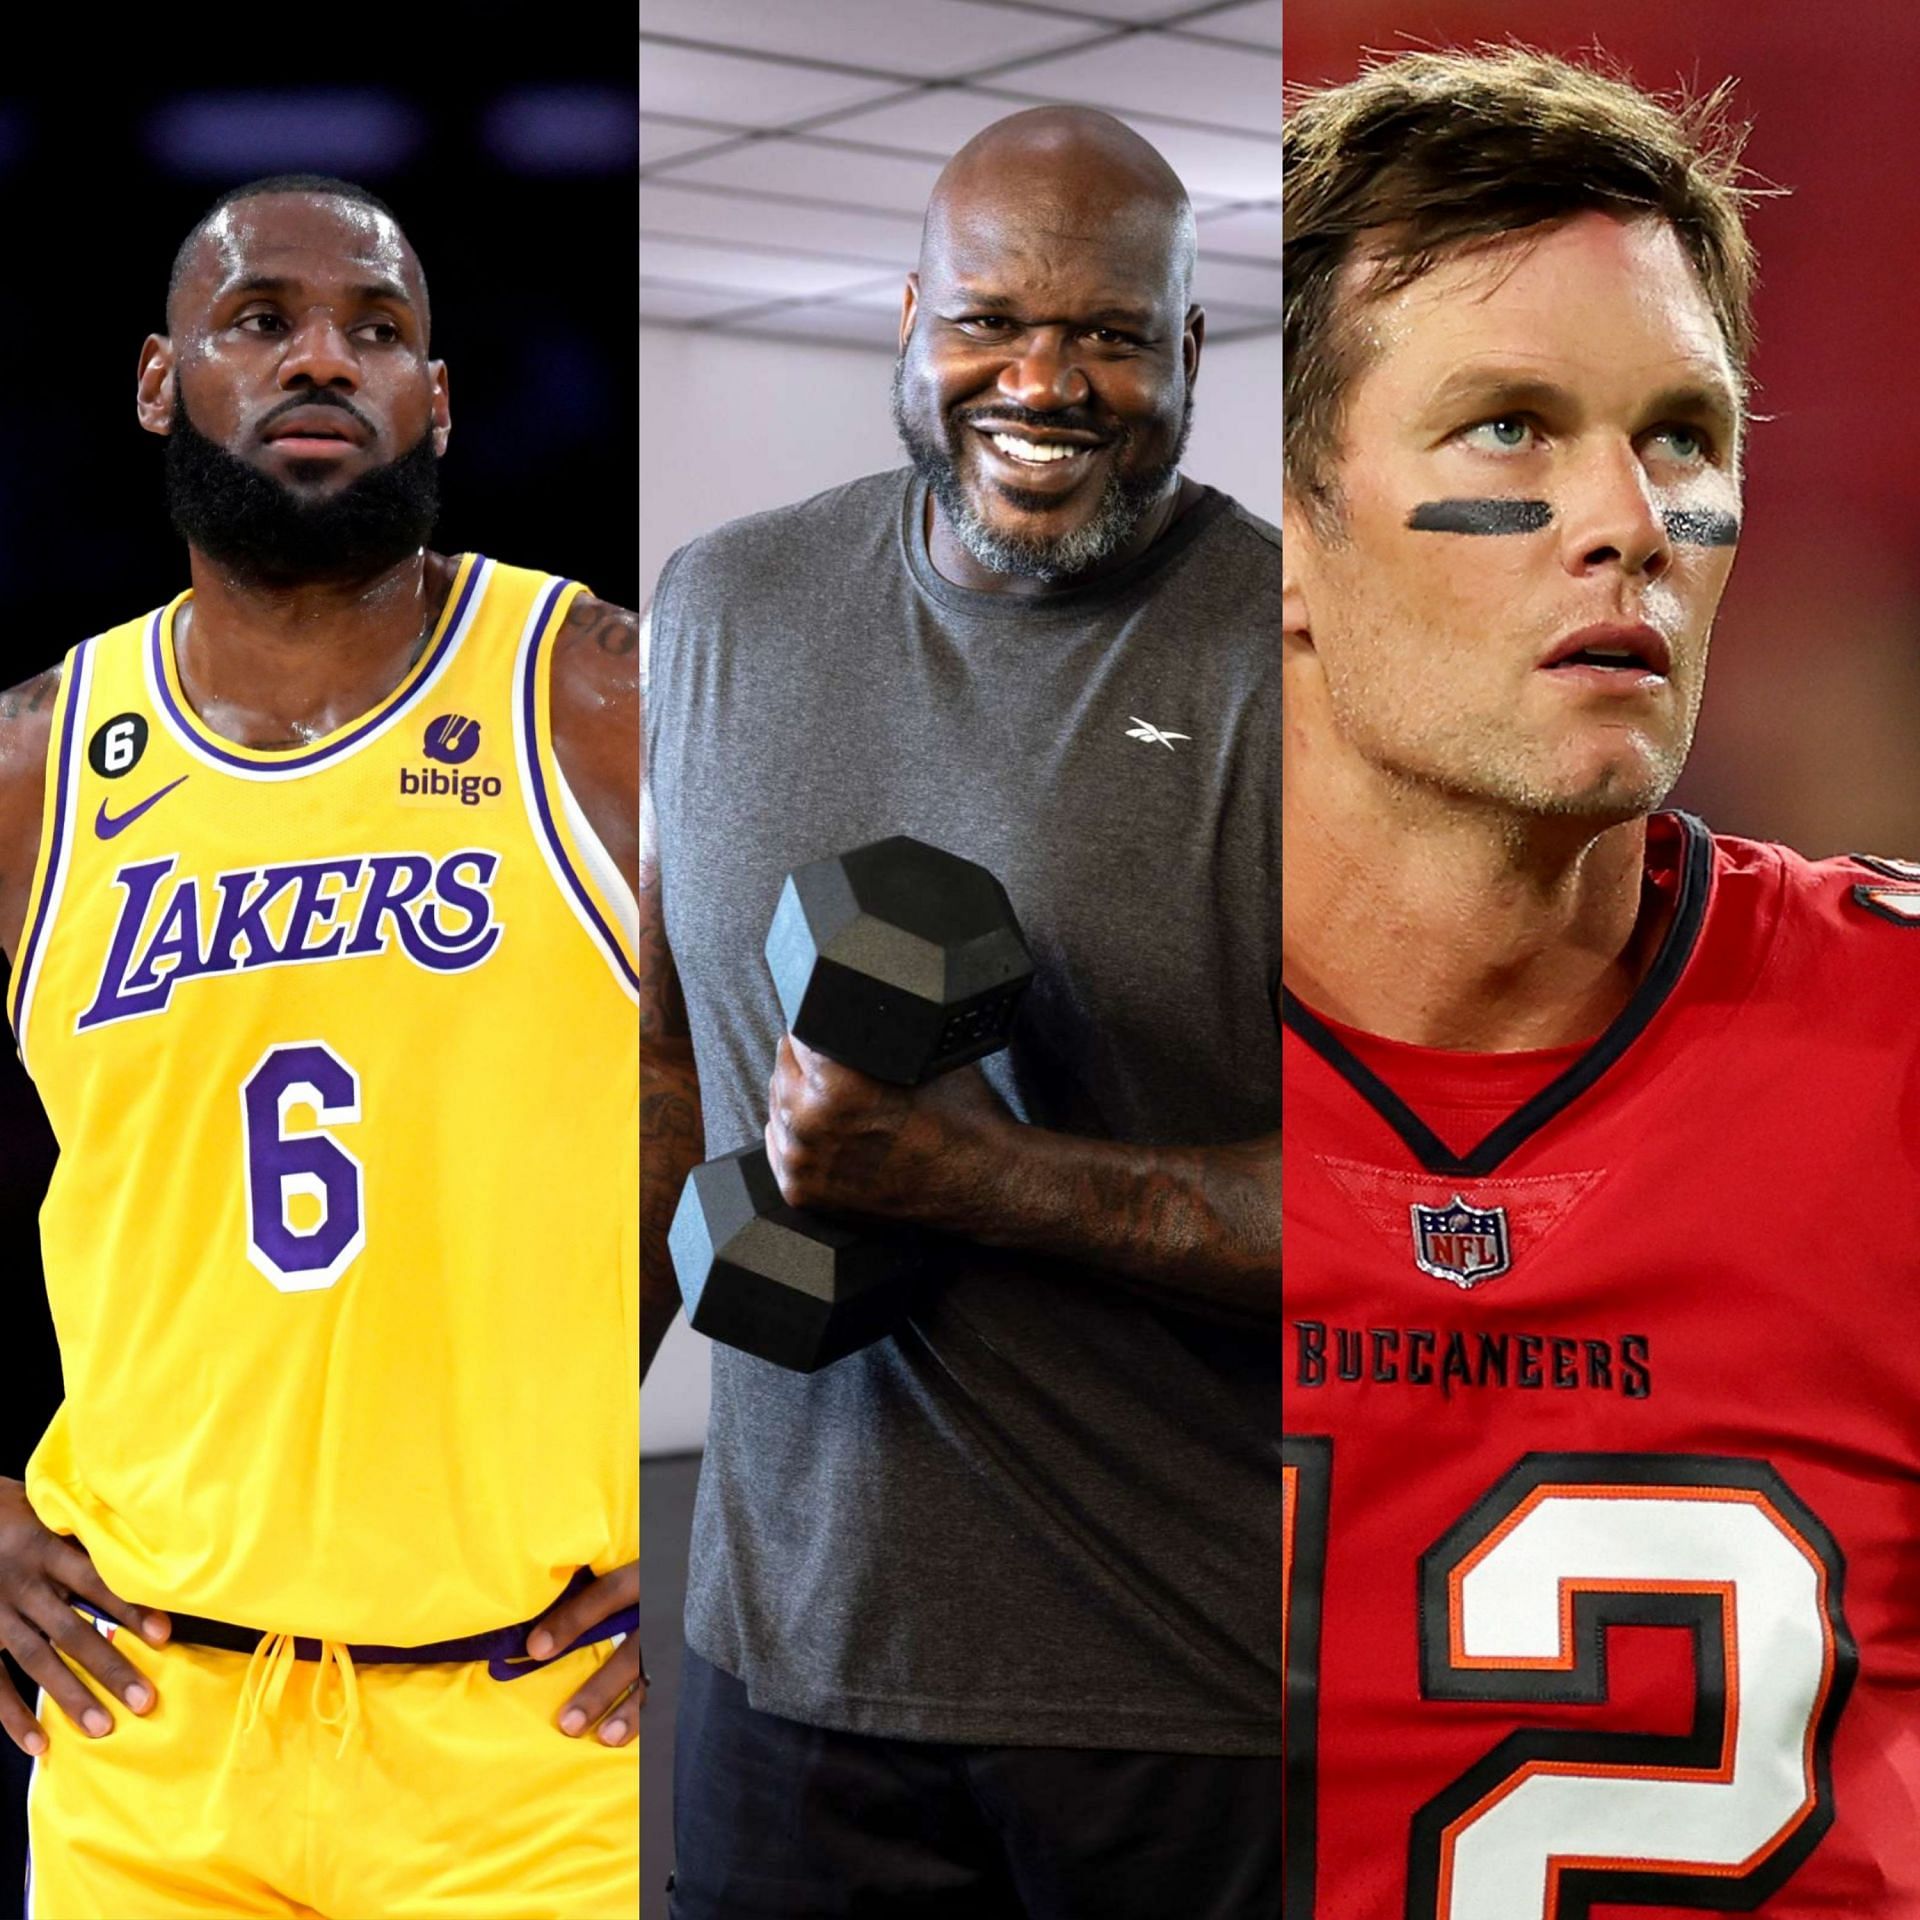 Tom Brady and LeBron James Have One Major Difference